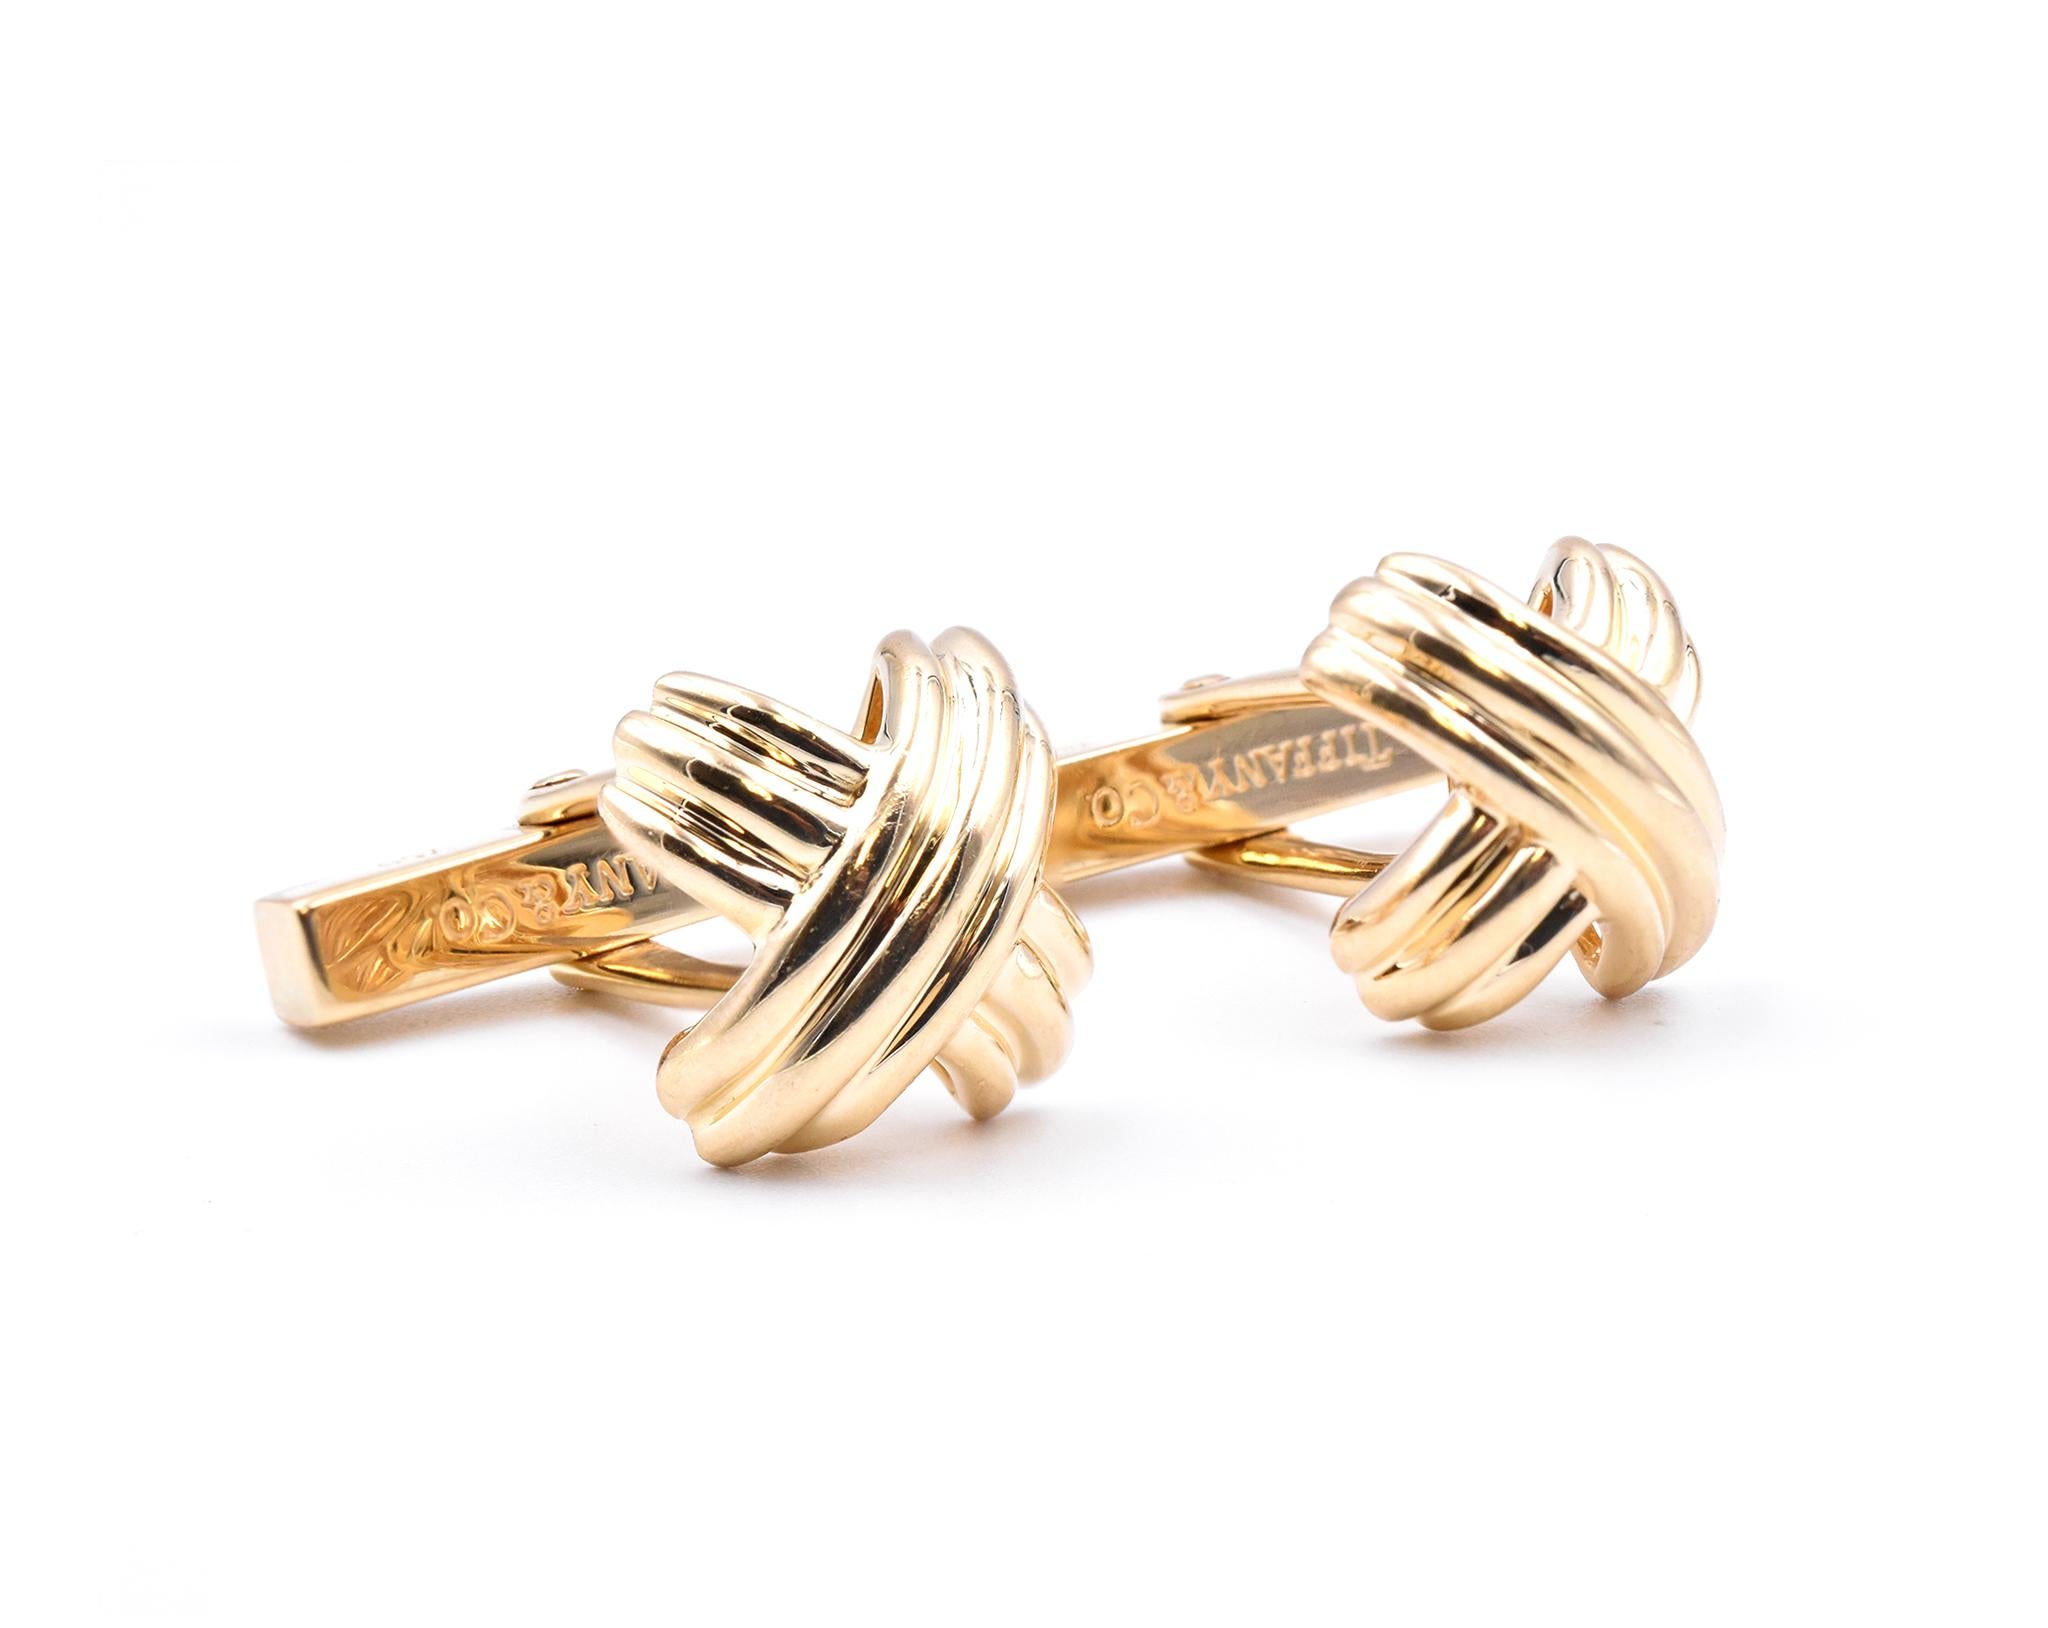 Designer: Tiffany & Co. 
Material: 18K yellow gold 
Dimensions: cufflinks measure 13.3mm wide
Weight: 15.10 grams